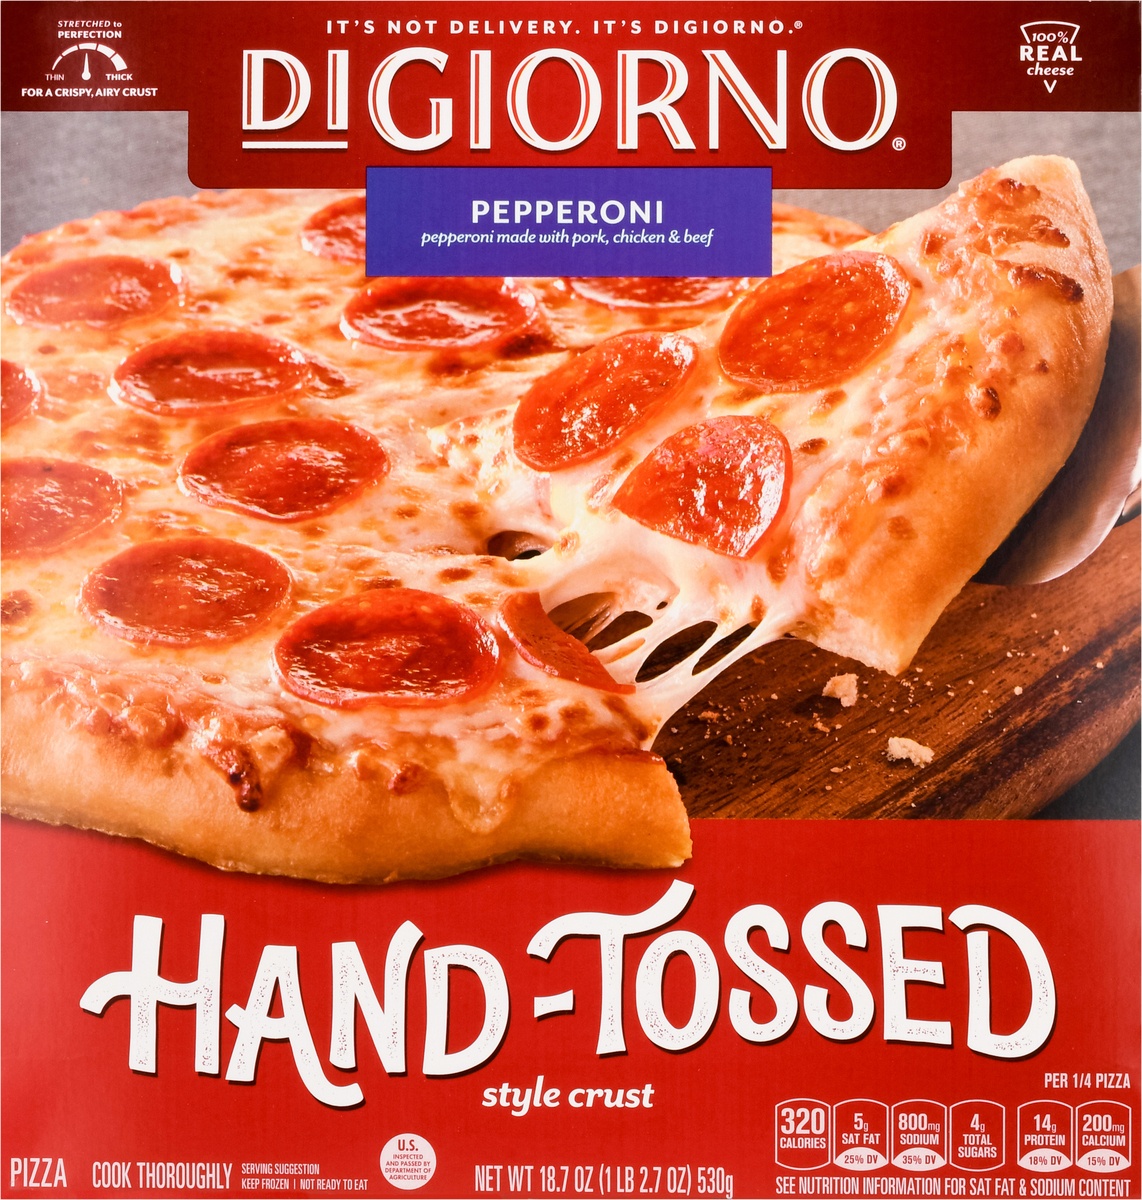 slide 9 of 10, DIGIORNO Pepperoni Frozen Pizza with Hand-Tossed Style Crust, 18.7 oz